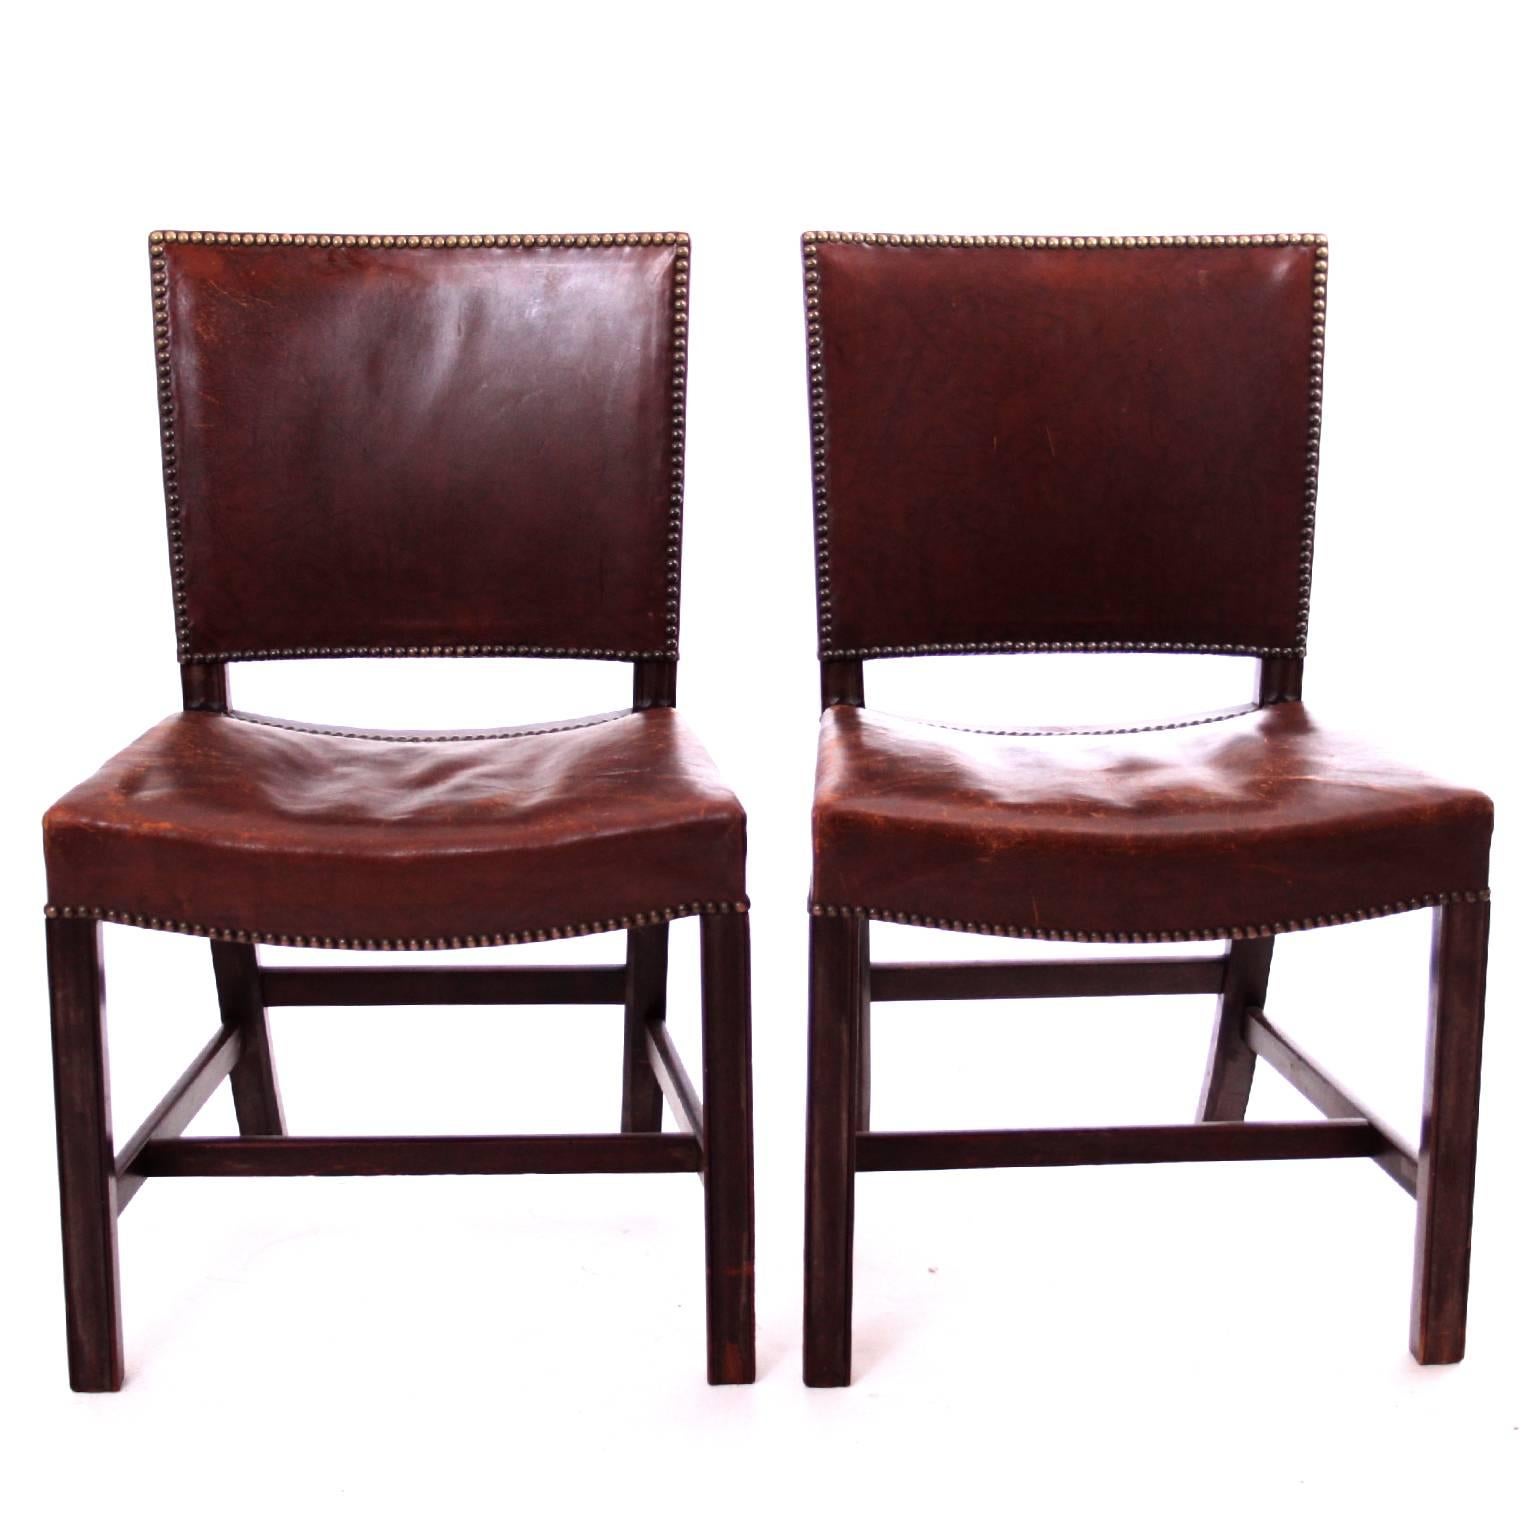 KAARE KLINT & CABINETMAKER RUD RASMUSSEN - SCANDINAVIAN MODERN

A set of two iconic Kaare Klint 'Red Chairs', executed by cabinetmaker Rud. Rasmussen, Denmark, 1930s. 

Profiled legs and seat and back upholstered with patinated brown leather and